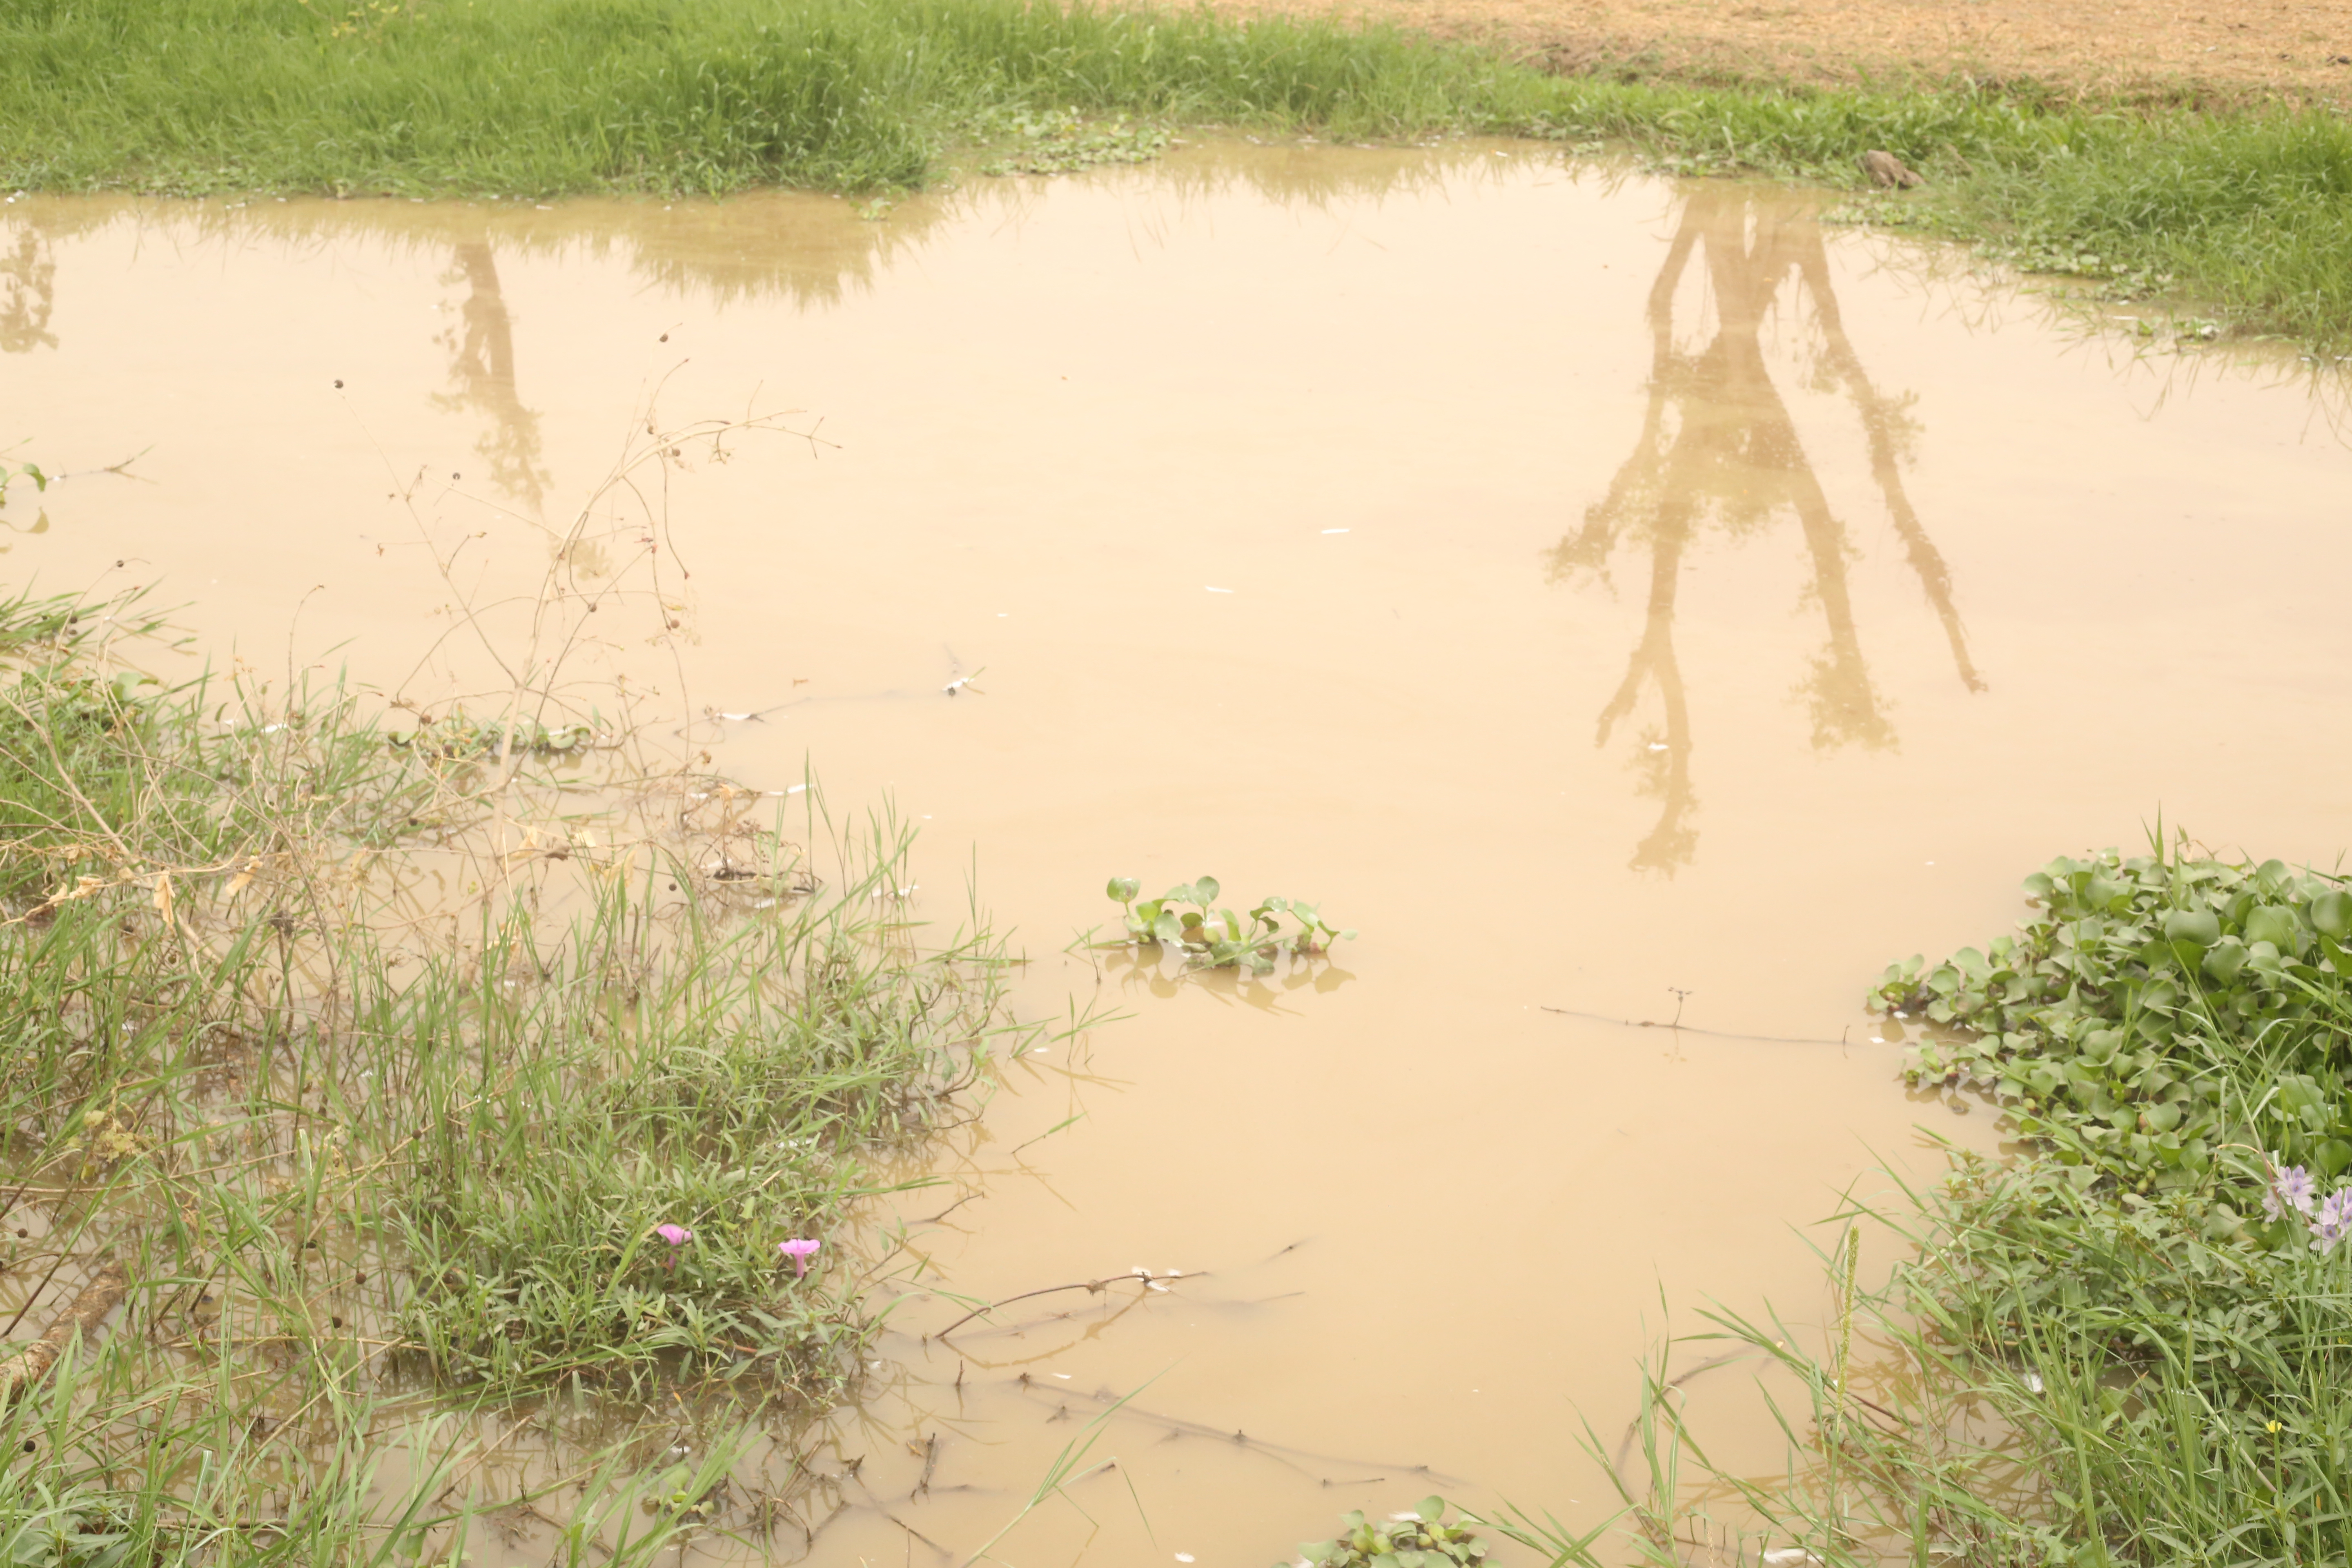 INVESTIGATION: Farmer-Herder Clashes in Nasarawa Through the Eyes of the Victims